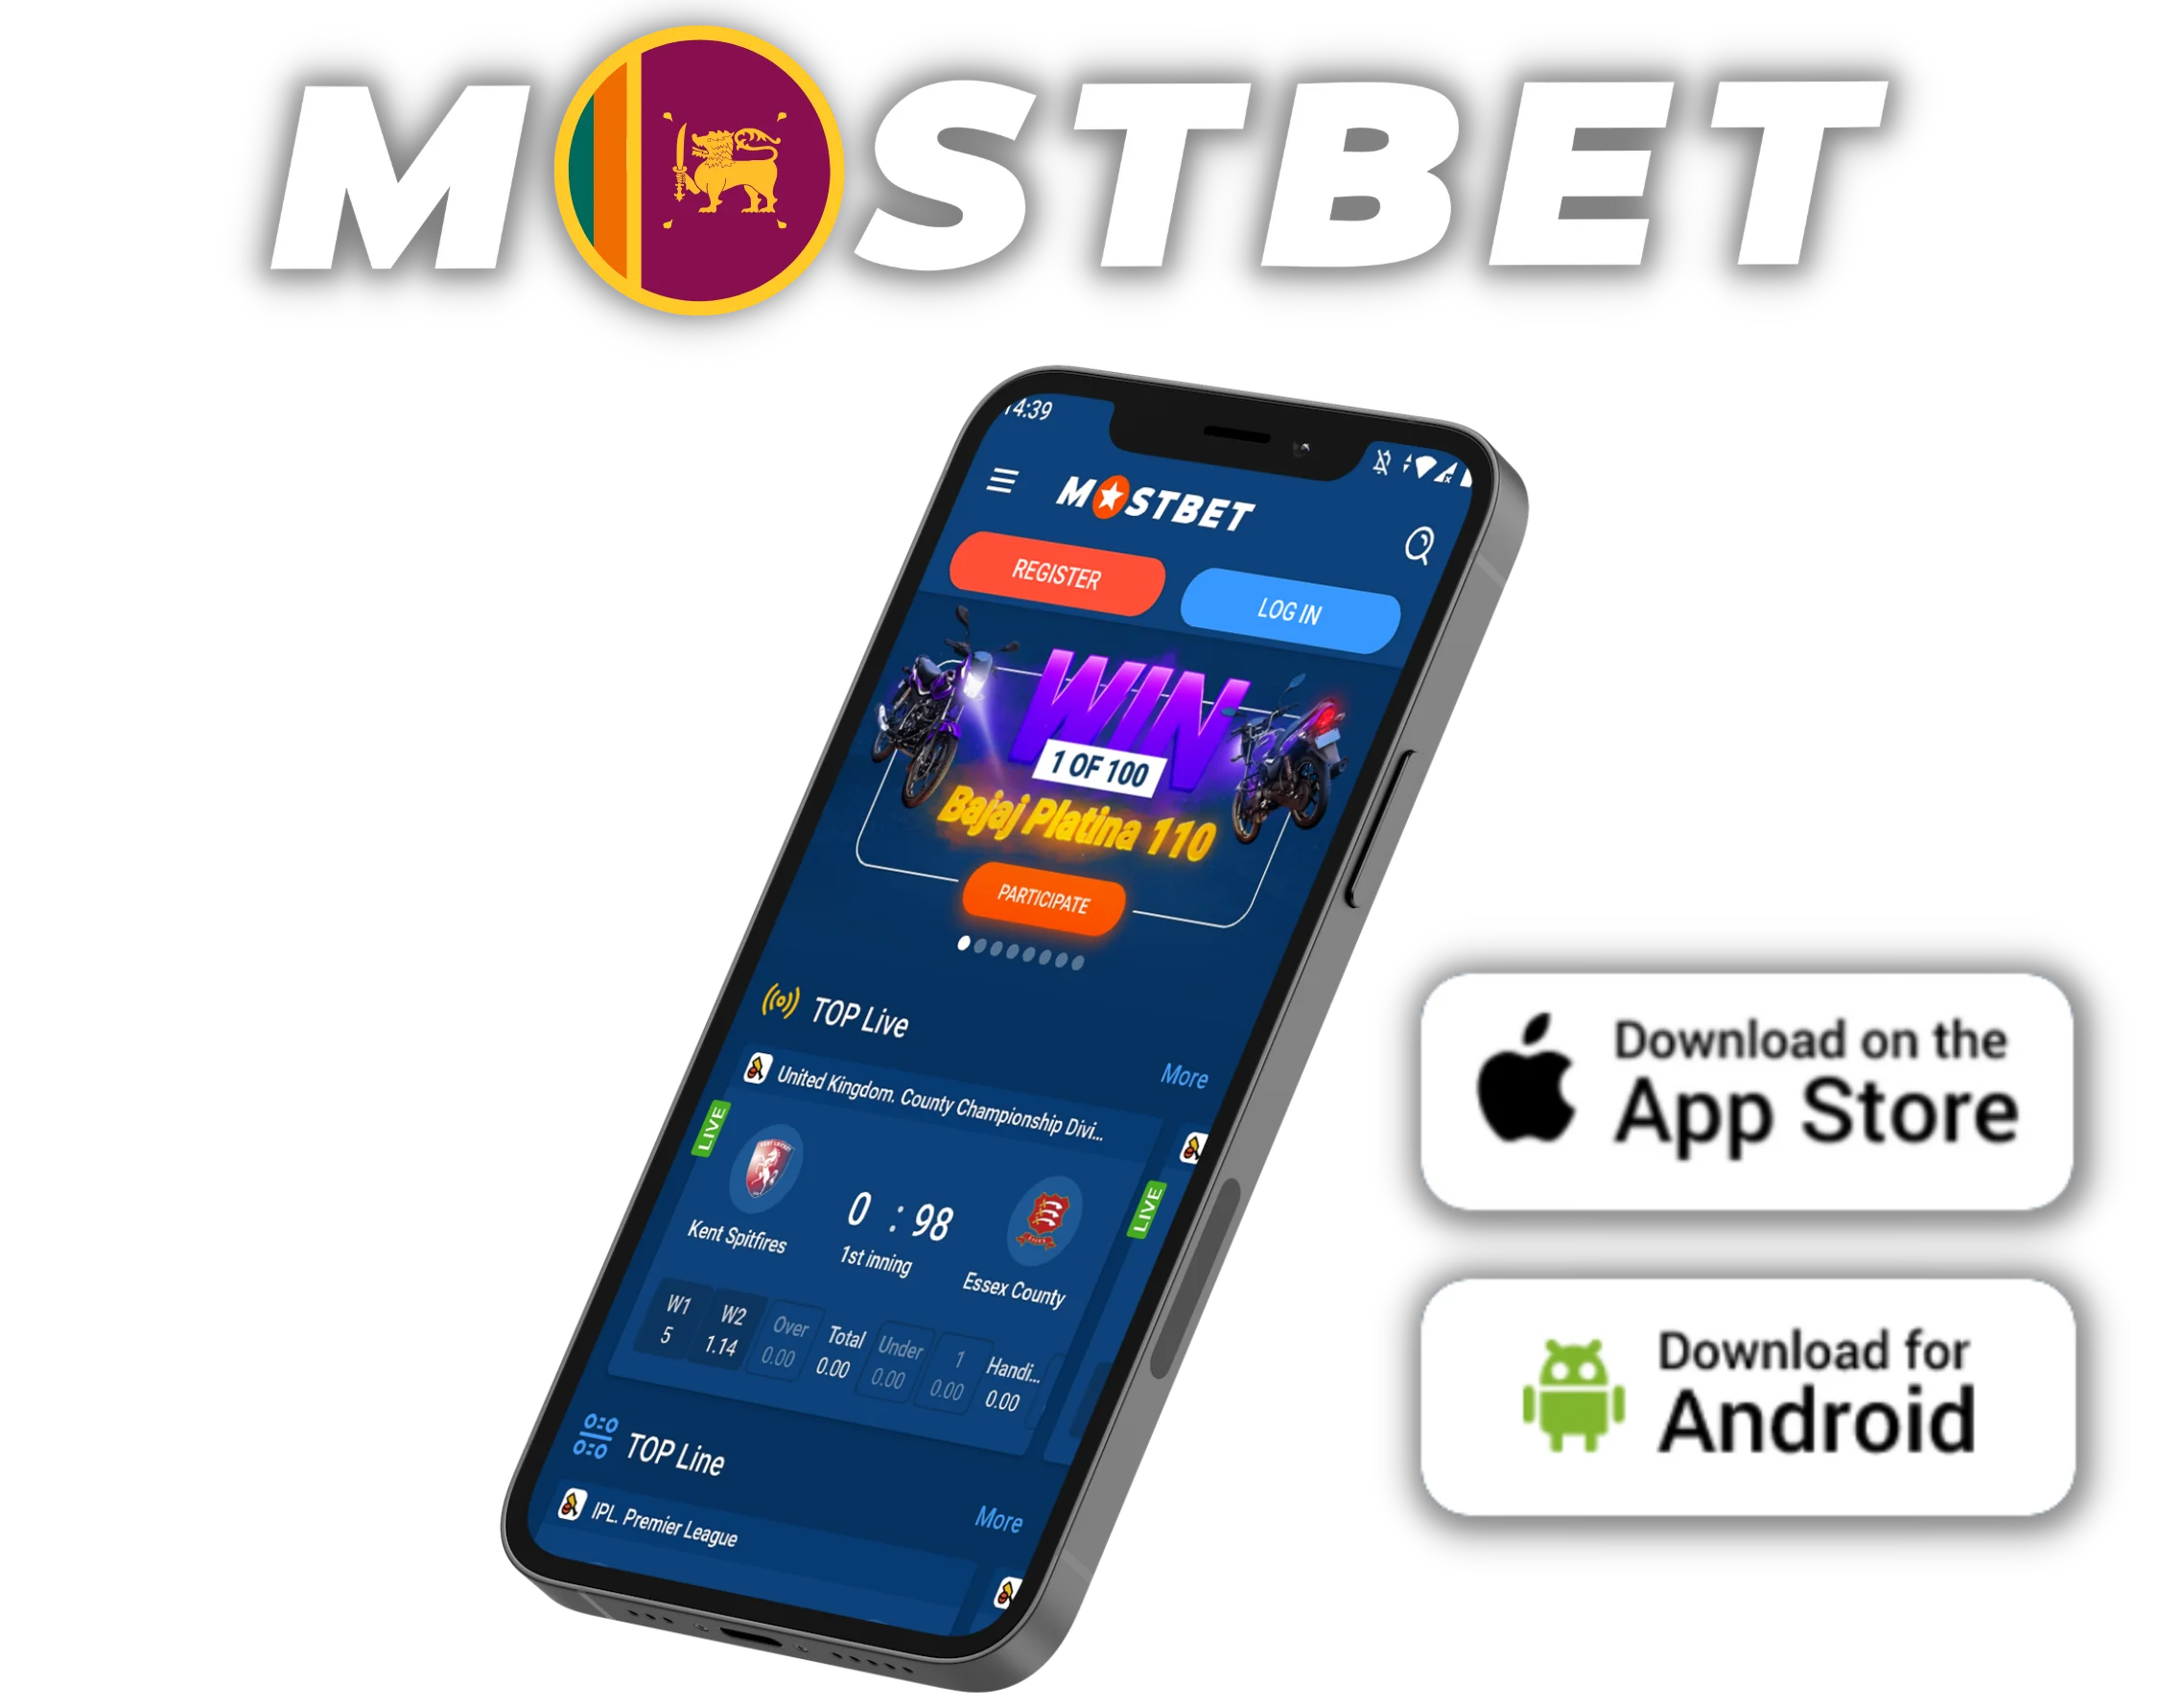 More on Making a Living Off of Mostbet Betting Company in Turkey